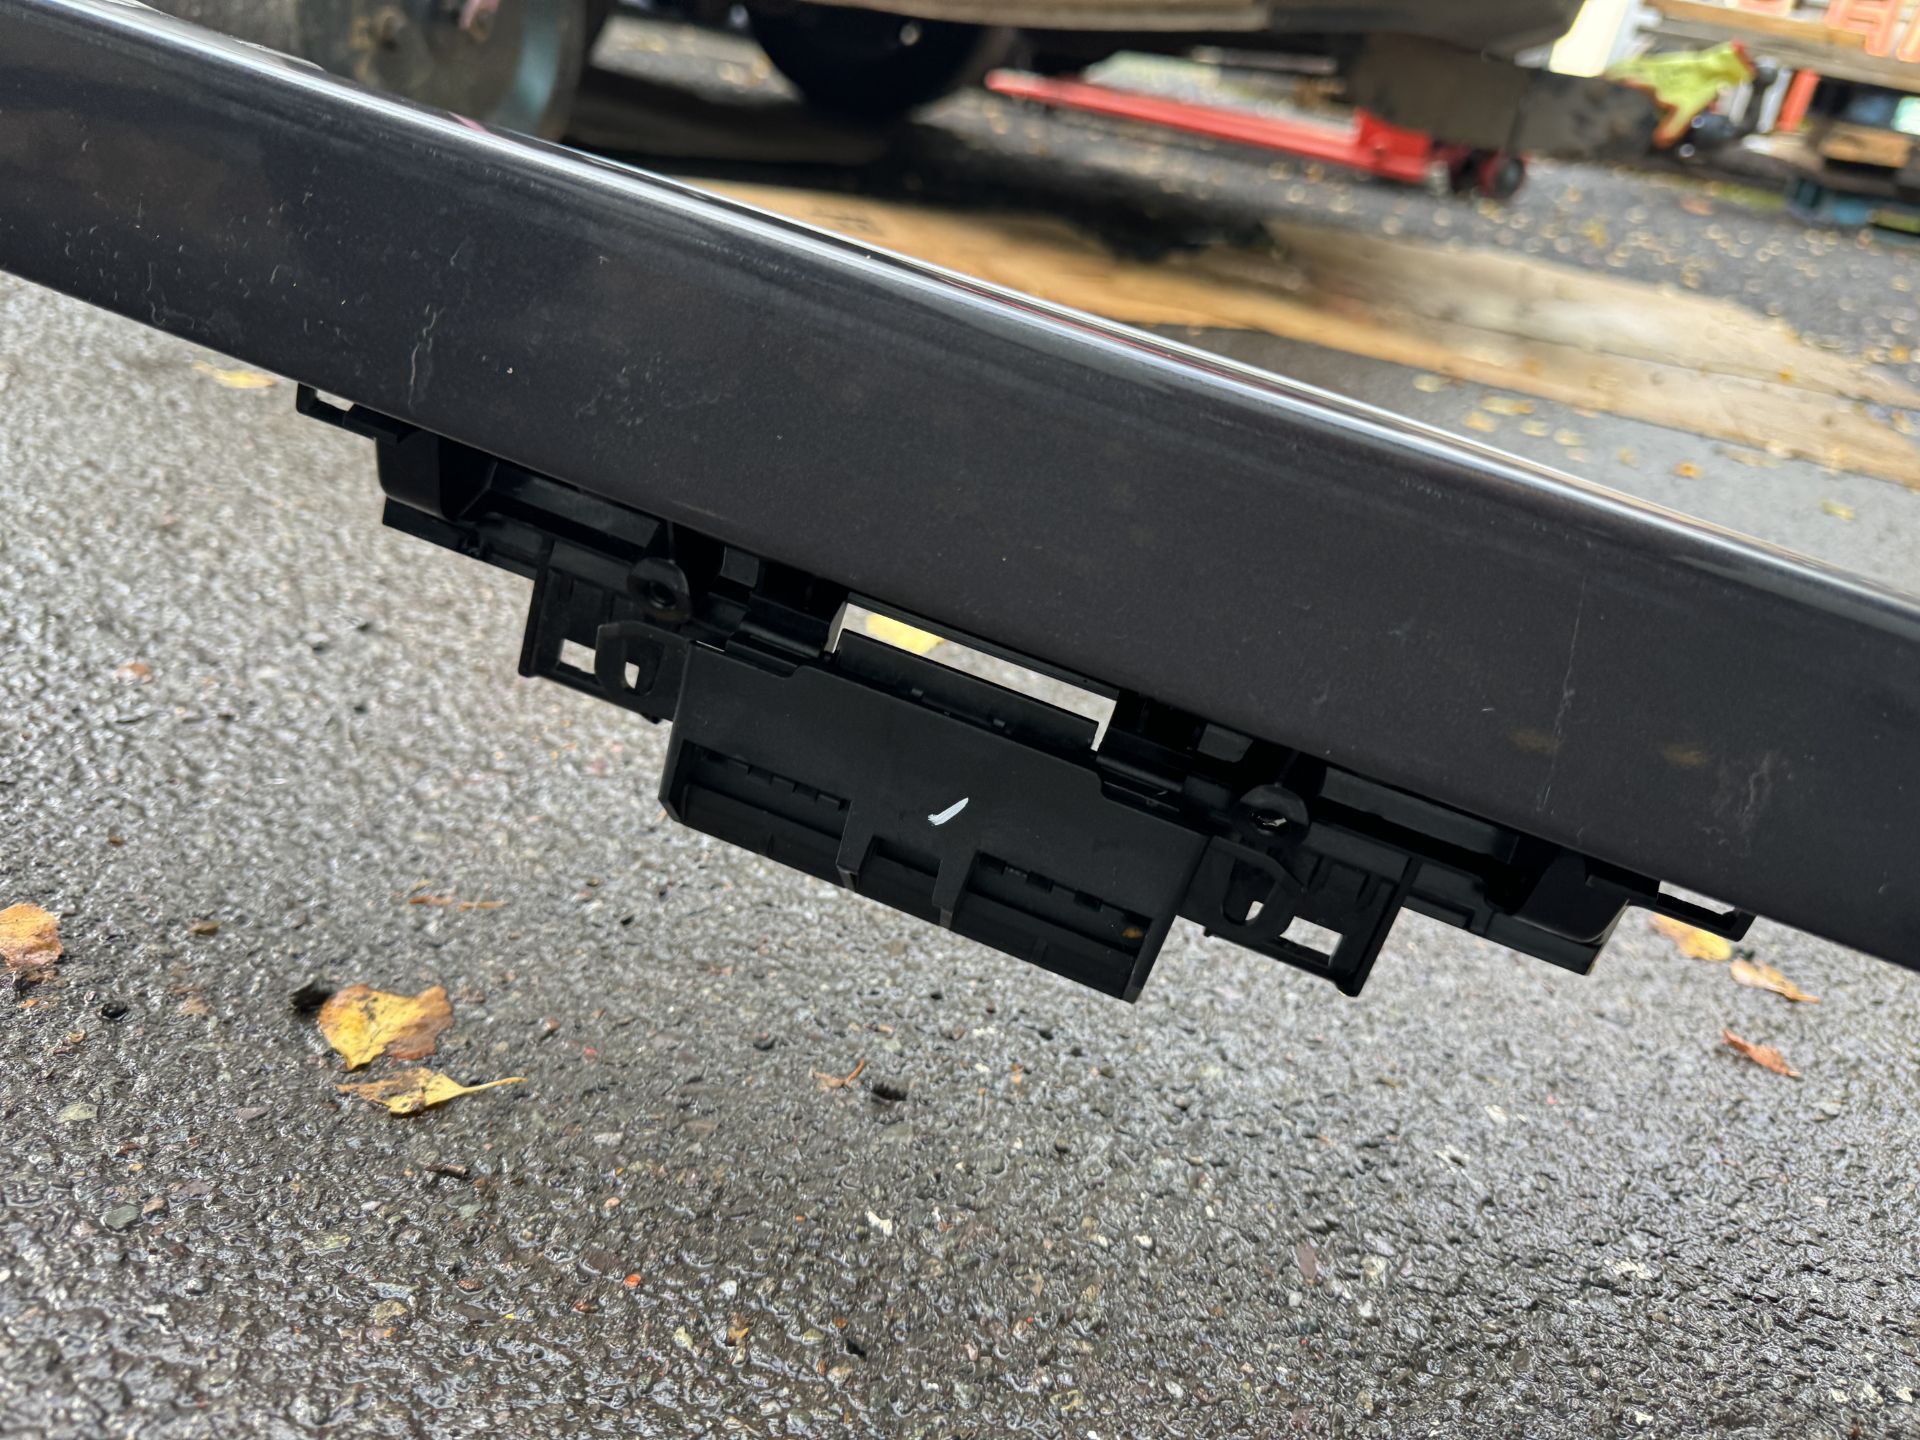 Genuine Ford Ranger Black Roller Tonneau Cover with Parts & Fixings as Shown - Further Details to be - Image 33 of 43